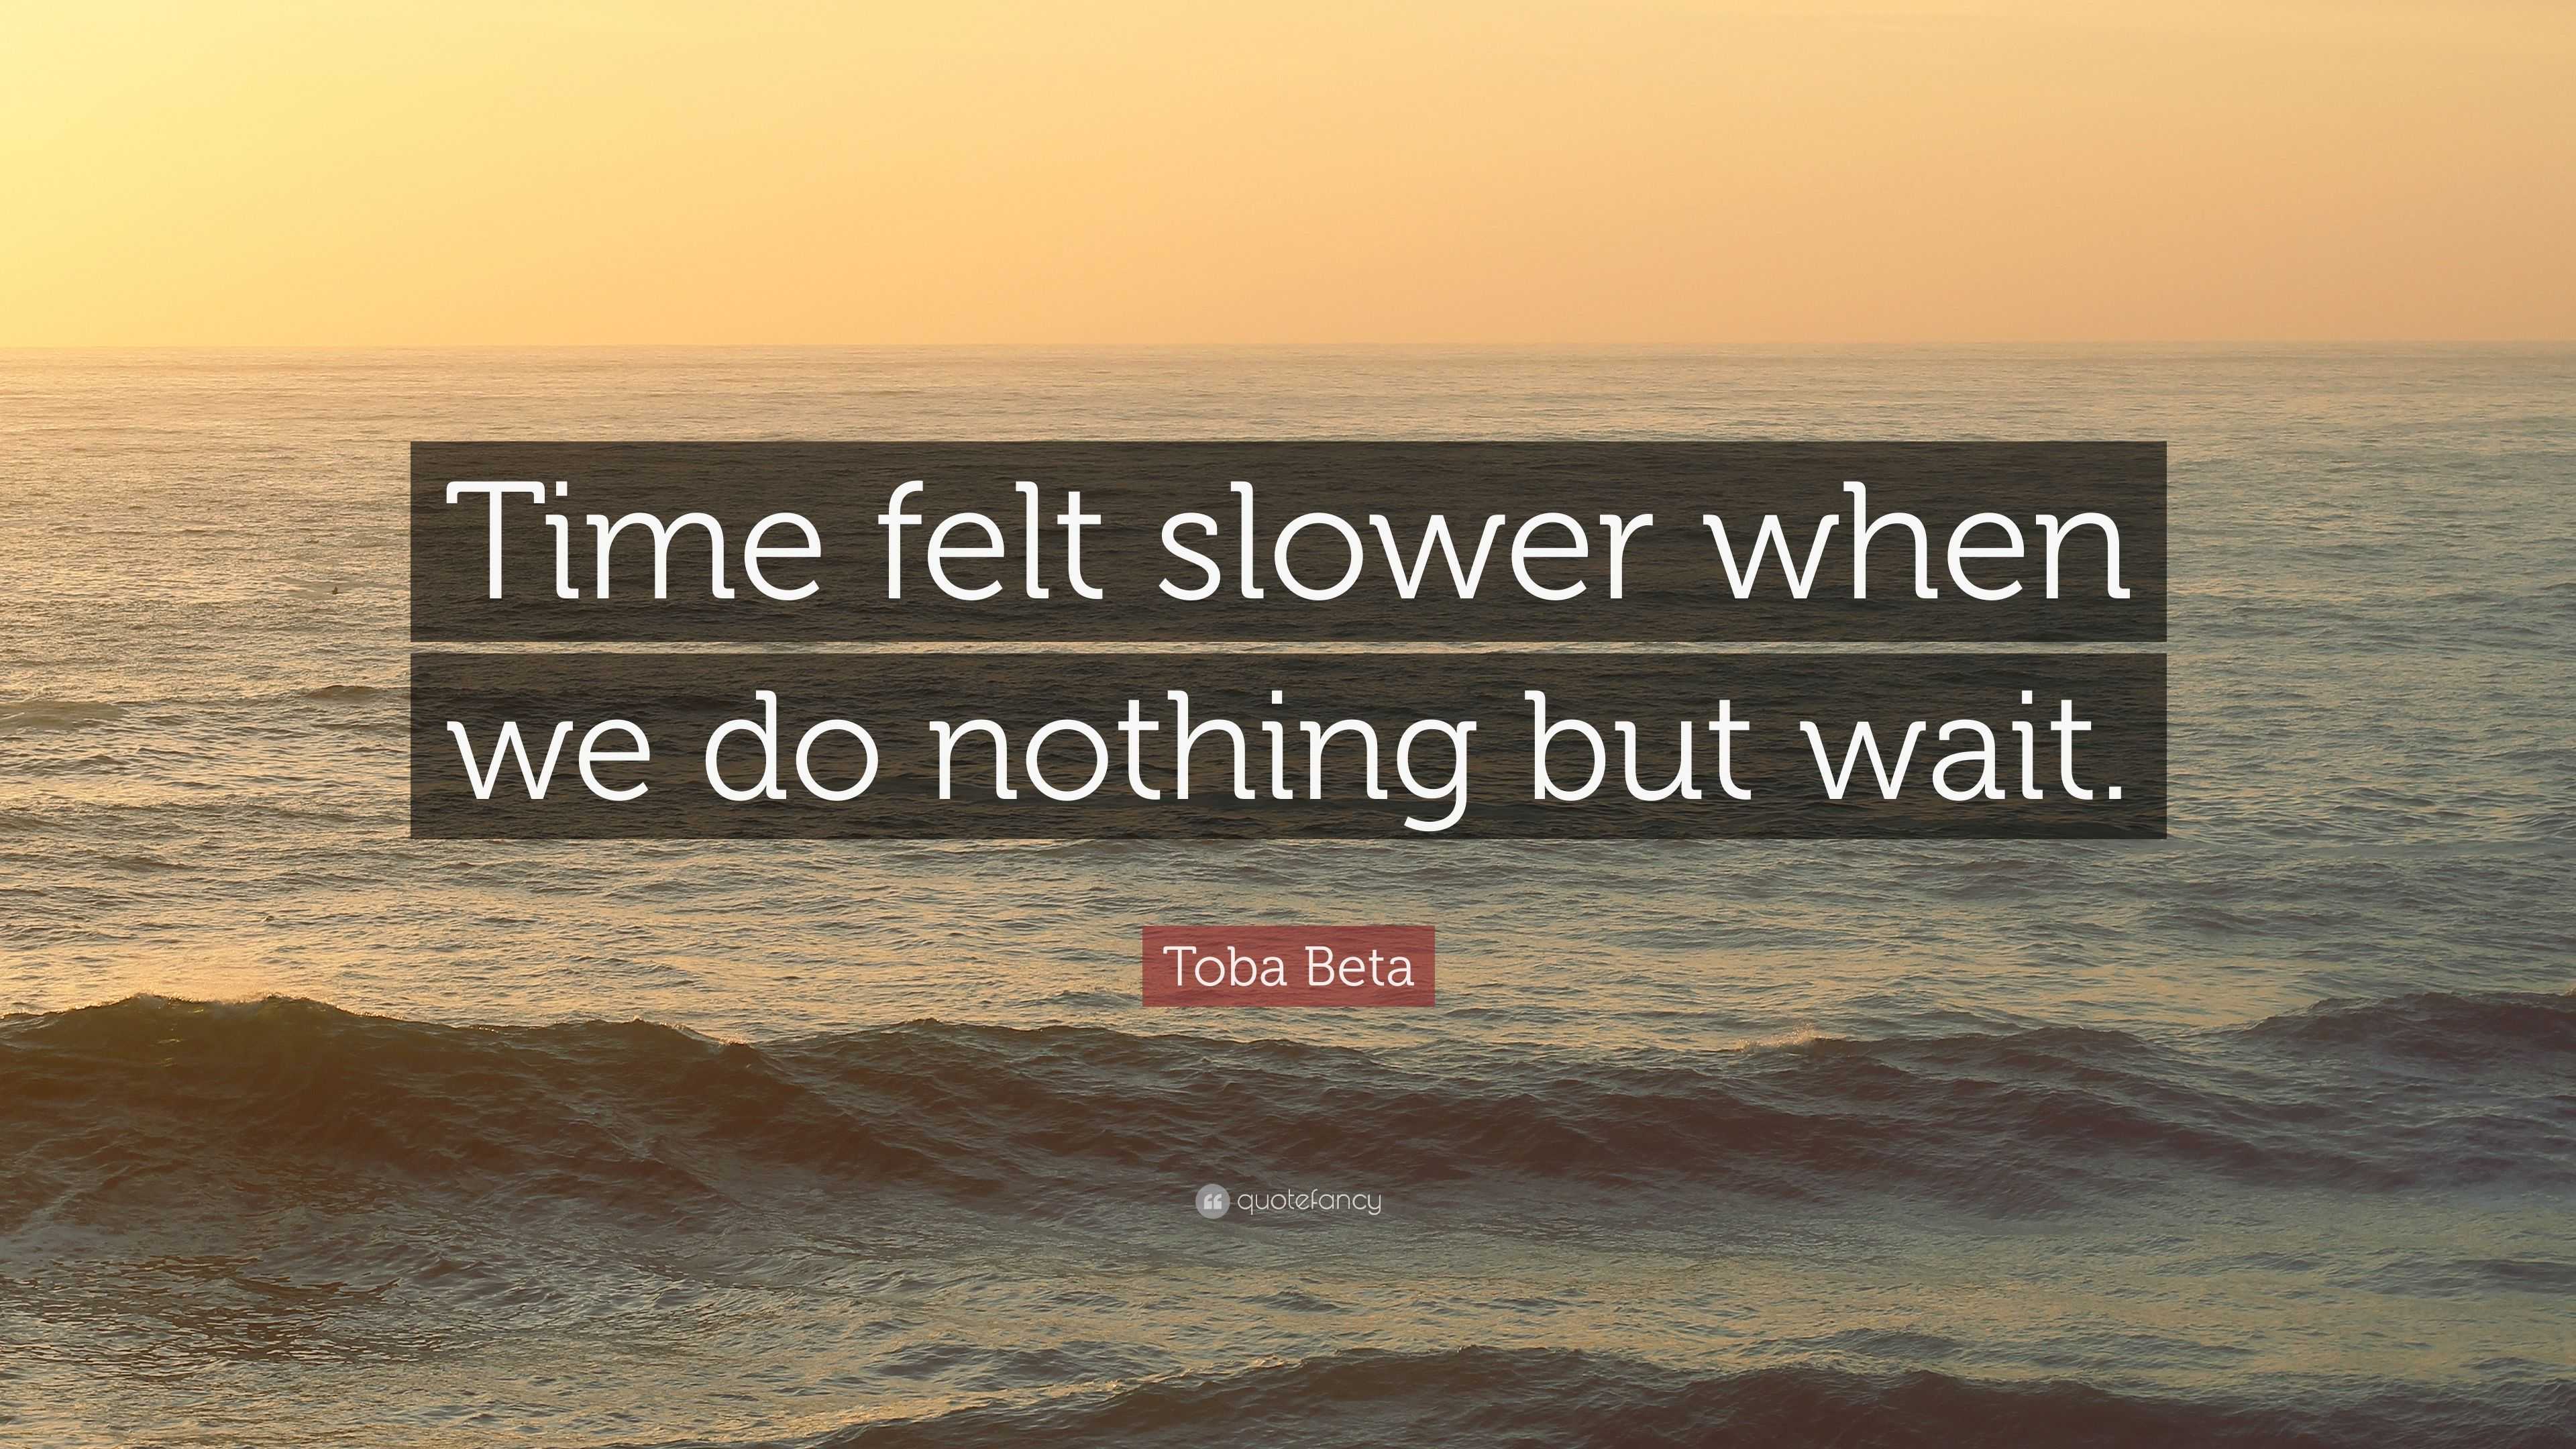 Toba Beta Quote: “Time felt slower when we do nothing but wait.”